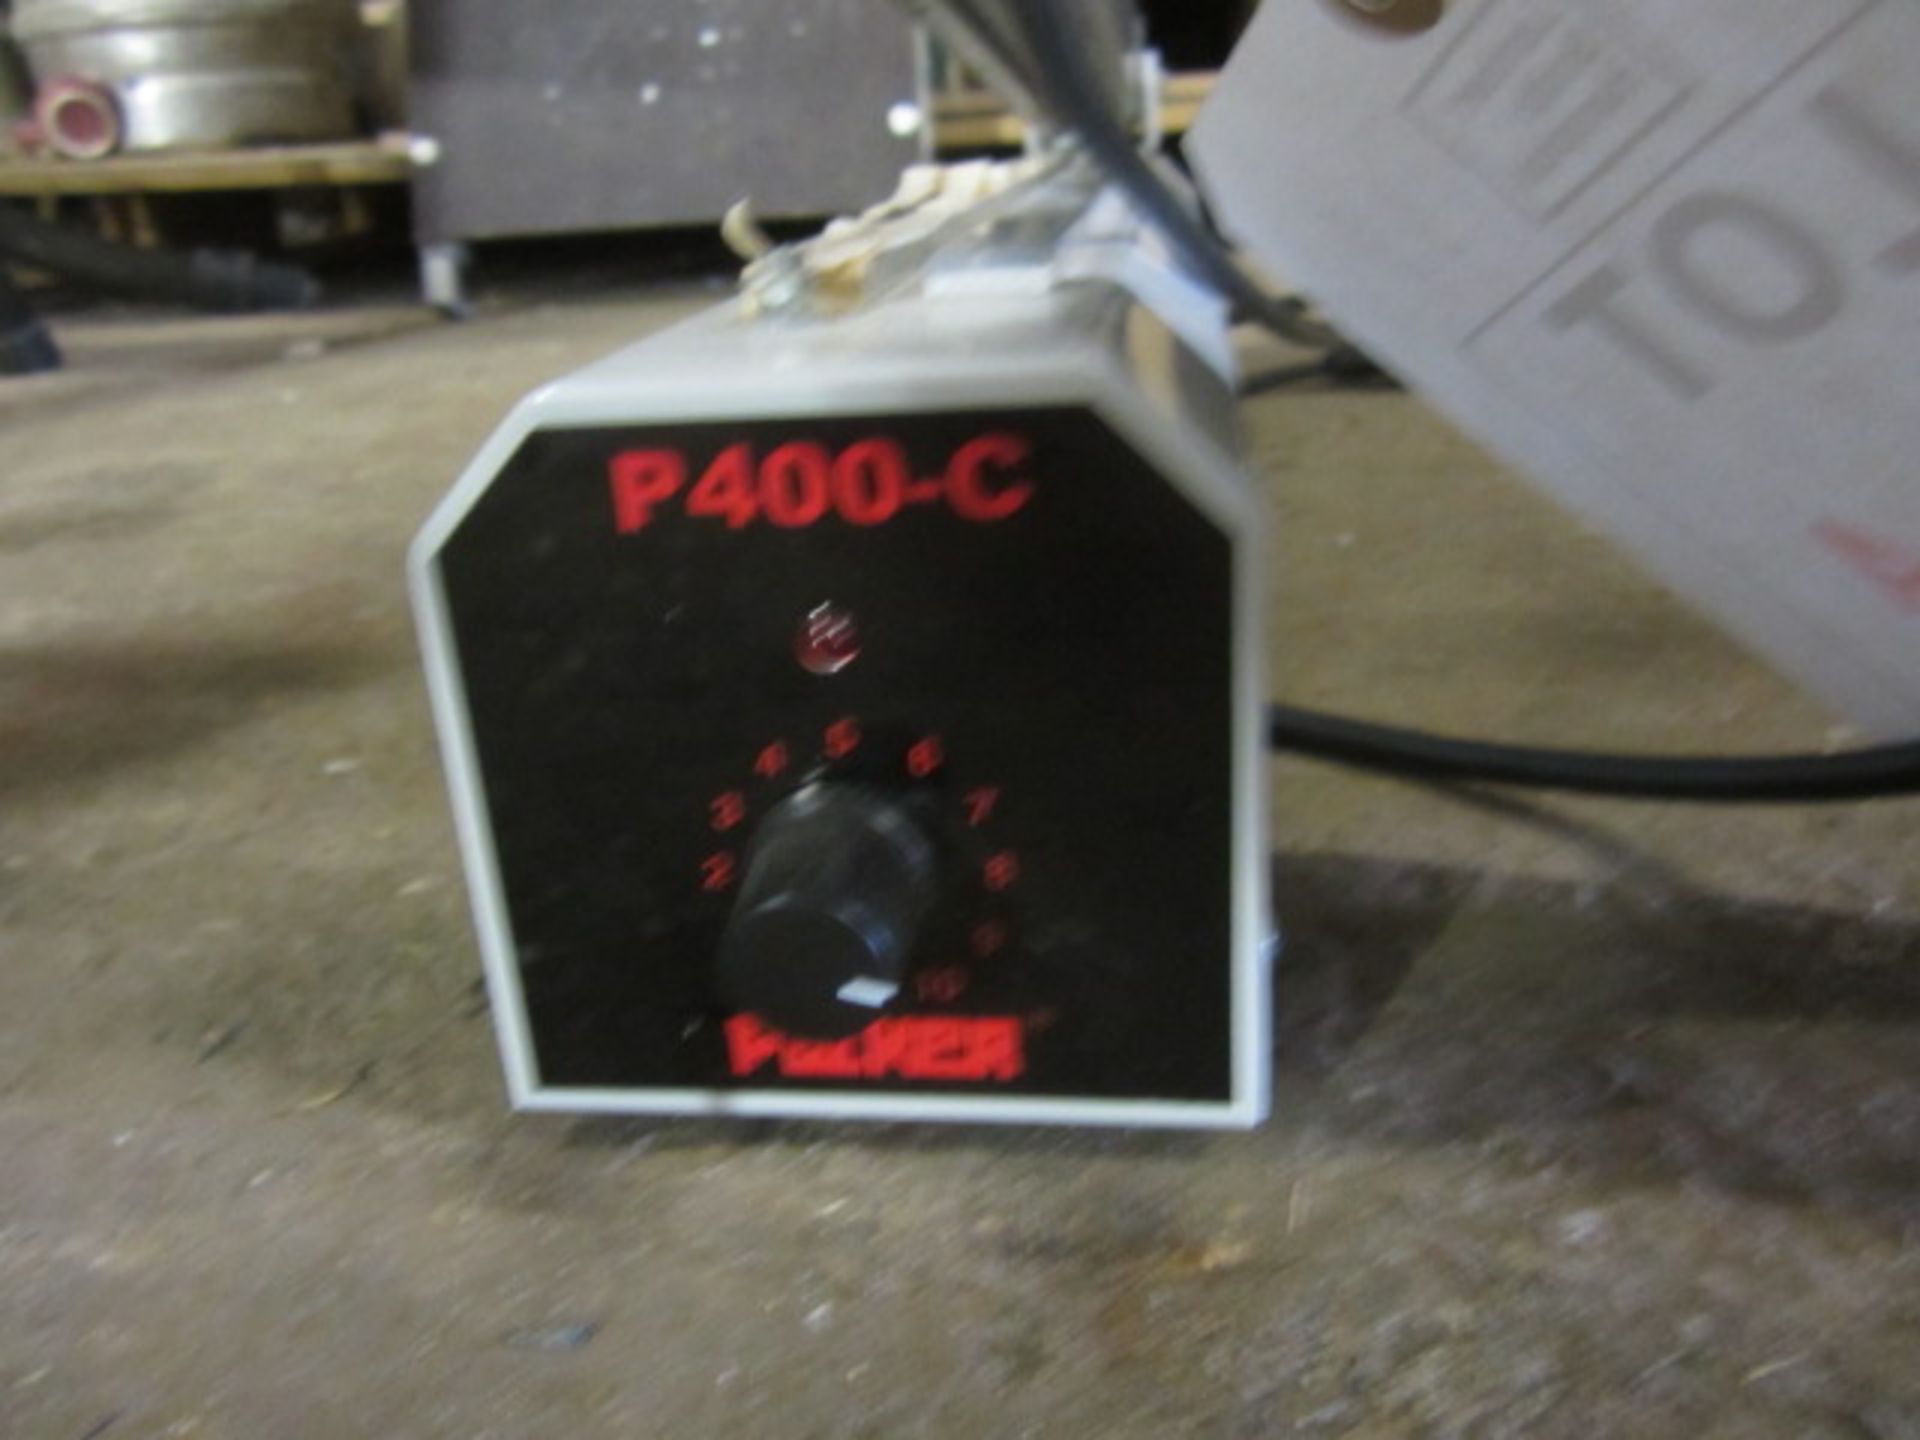 Packer P400C heat sealer, 240v** Located at Stoneford Farm, Steamalong Road, Isle Abbotts, Nr - Image 2 of 2